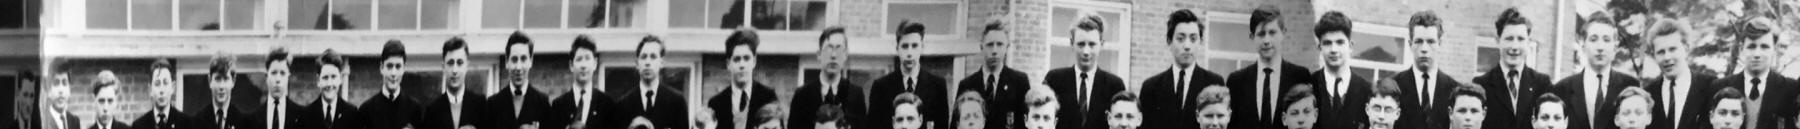 Extract from 1956 School Photograph